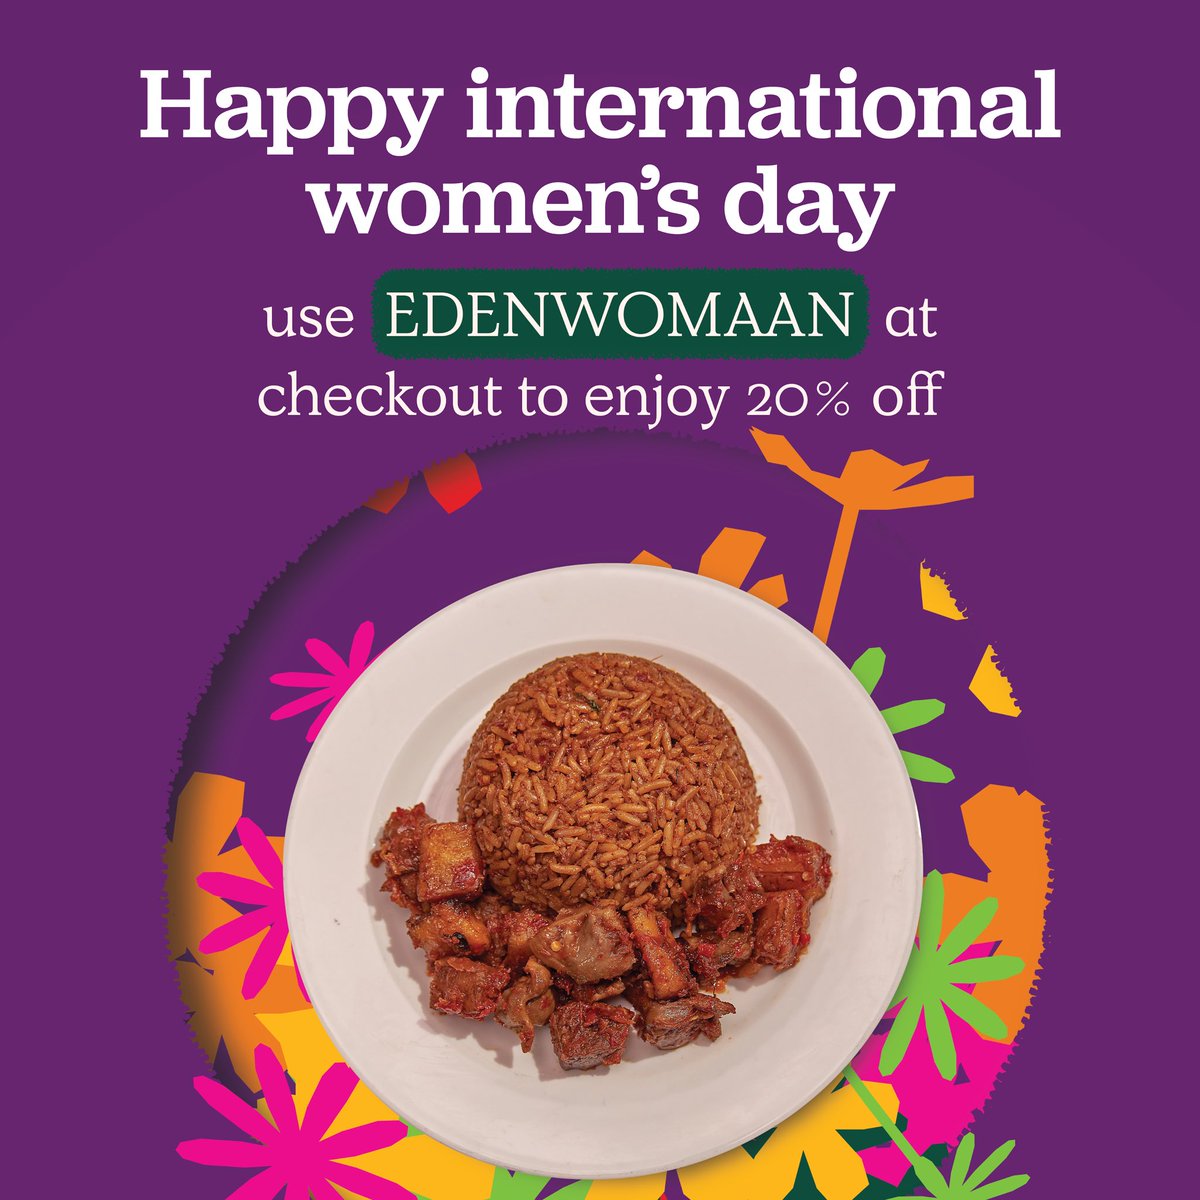 Happy International Women’s day !🎊💜

Enjoy 20% off on all your favorite Homemade meals when you use EDENWOMAAN at checkout.

Click this link ouredenlife.com/homemade to start shopping 😉

#inspireinclusion2024 
#FlourishwithEden